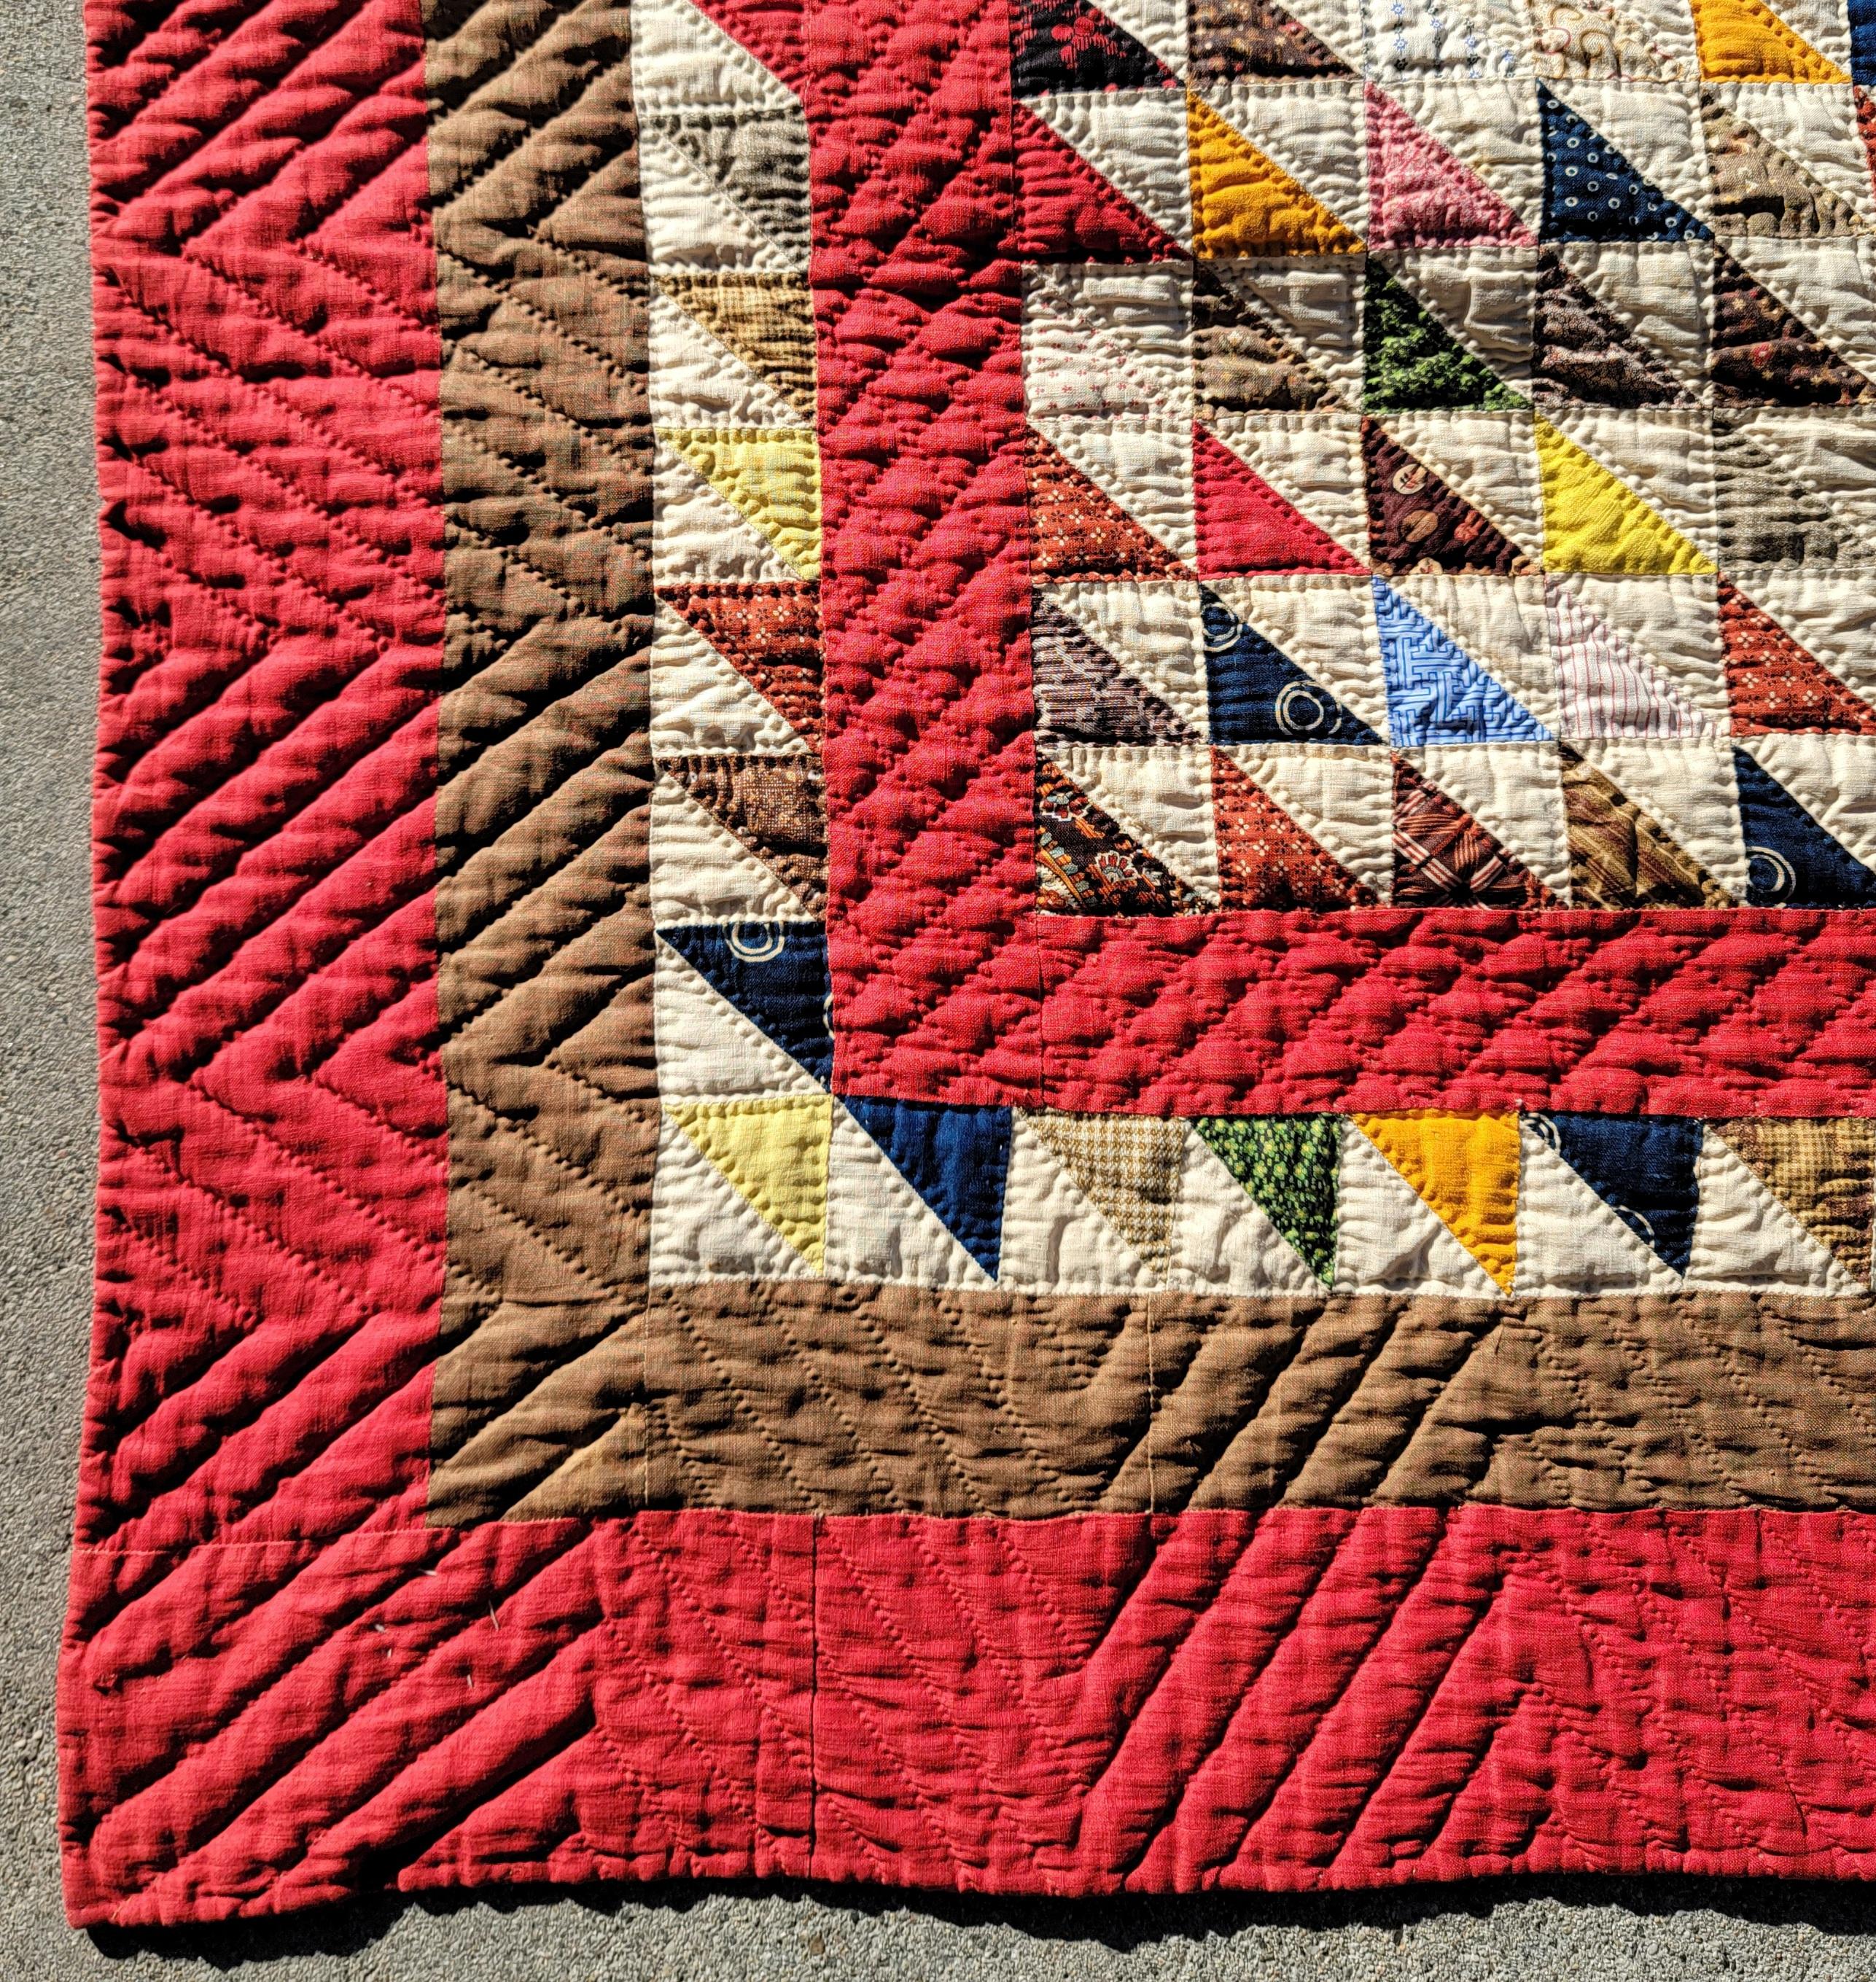 Hand-Crafted 19th C Mini Pieced Birds in Flight Quilt For Sale